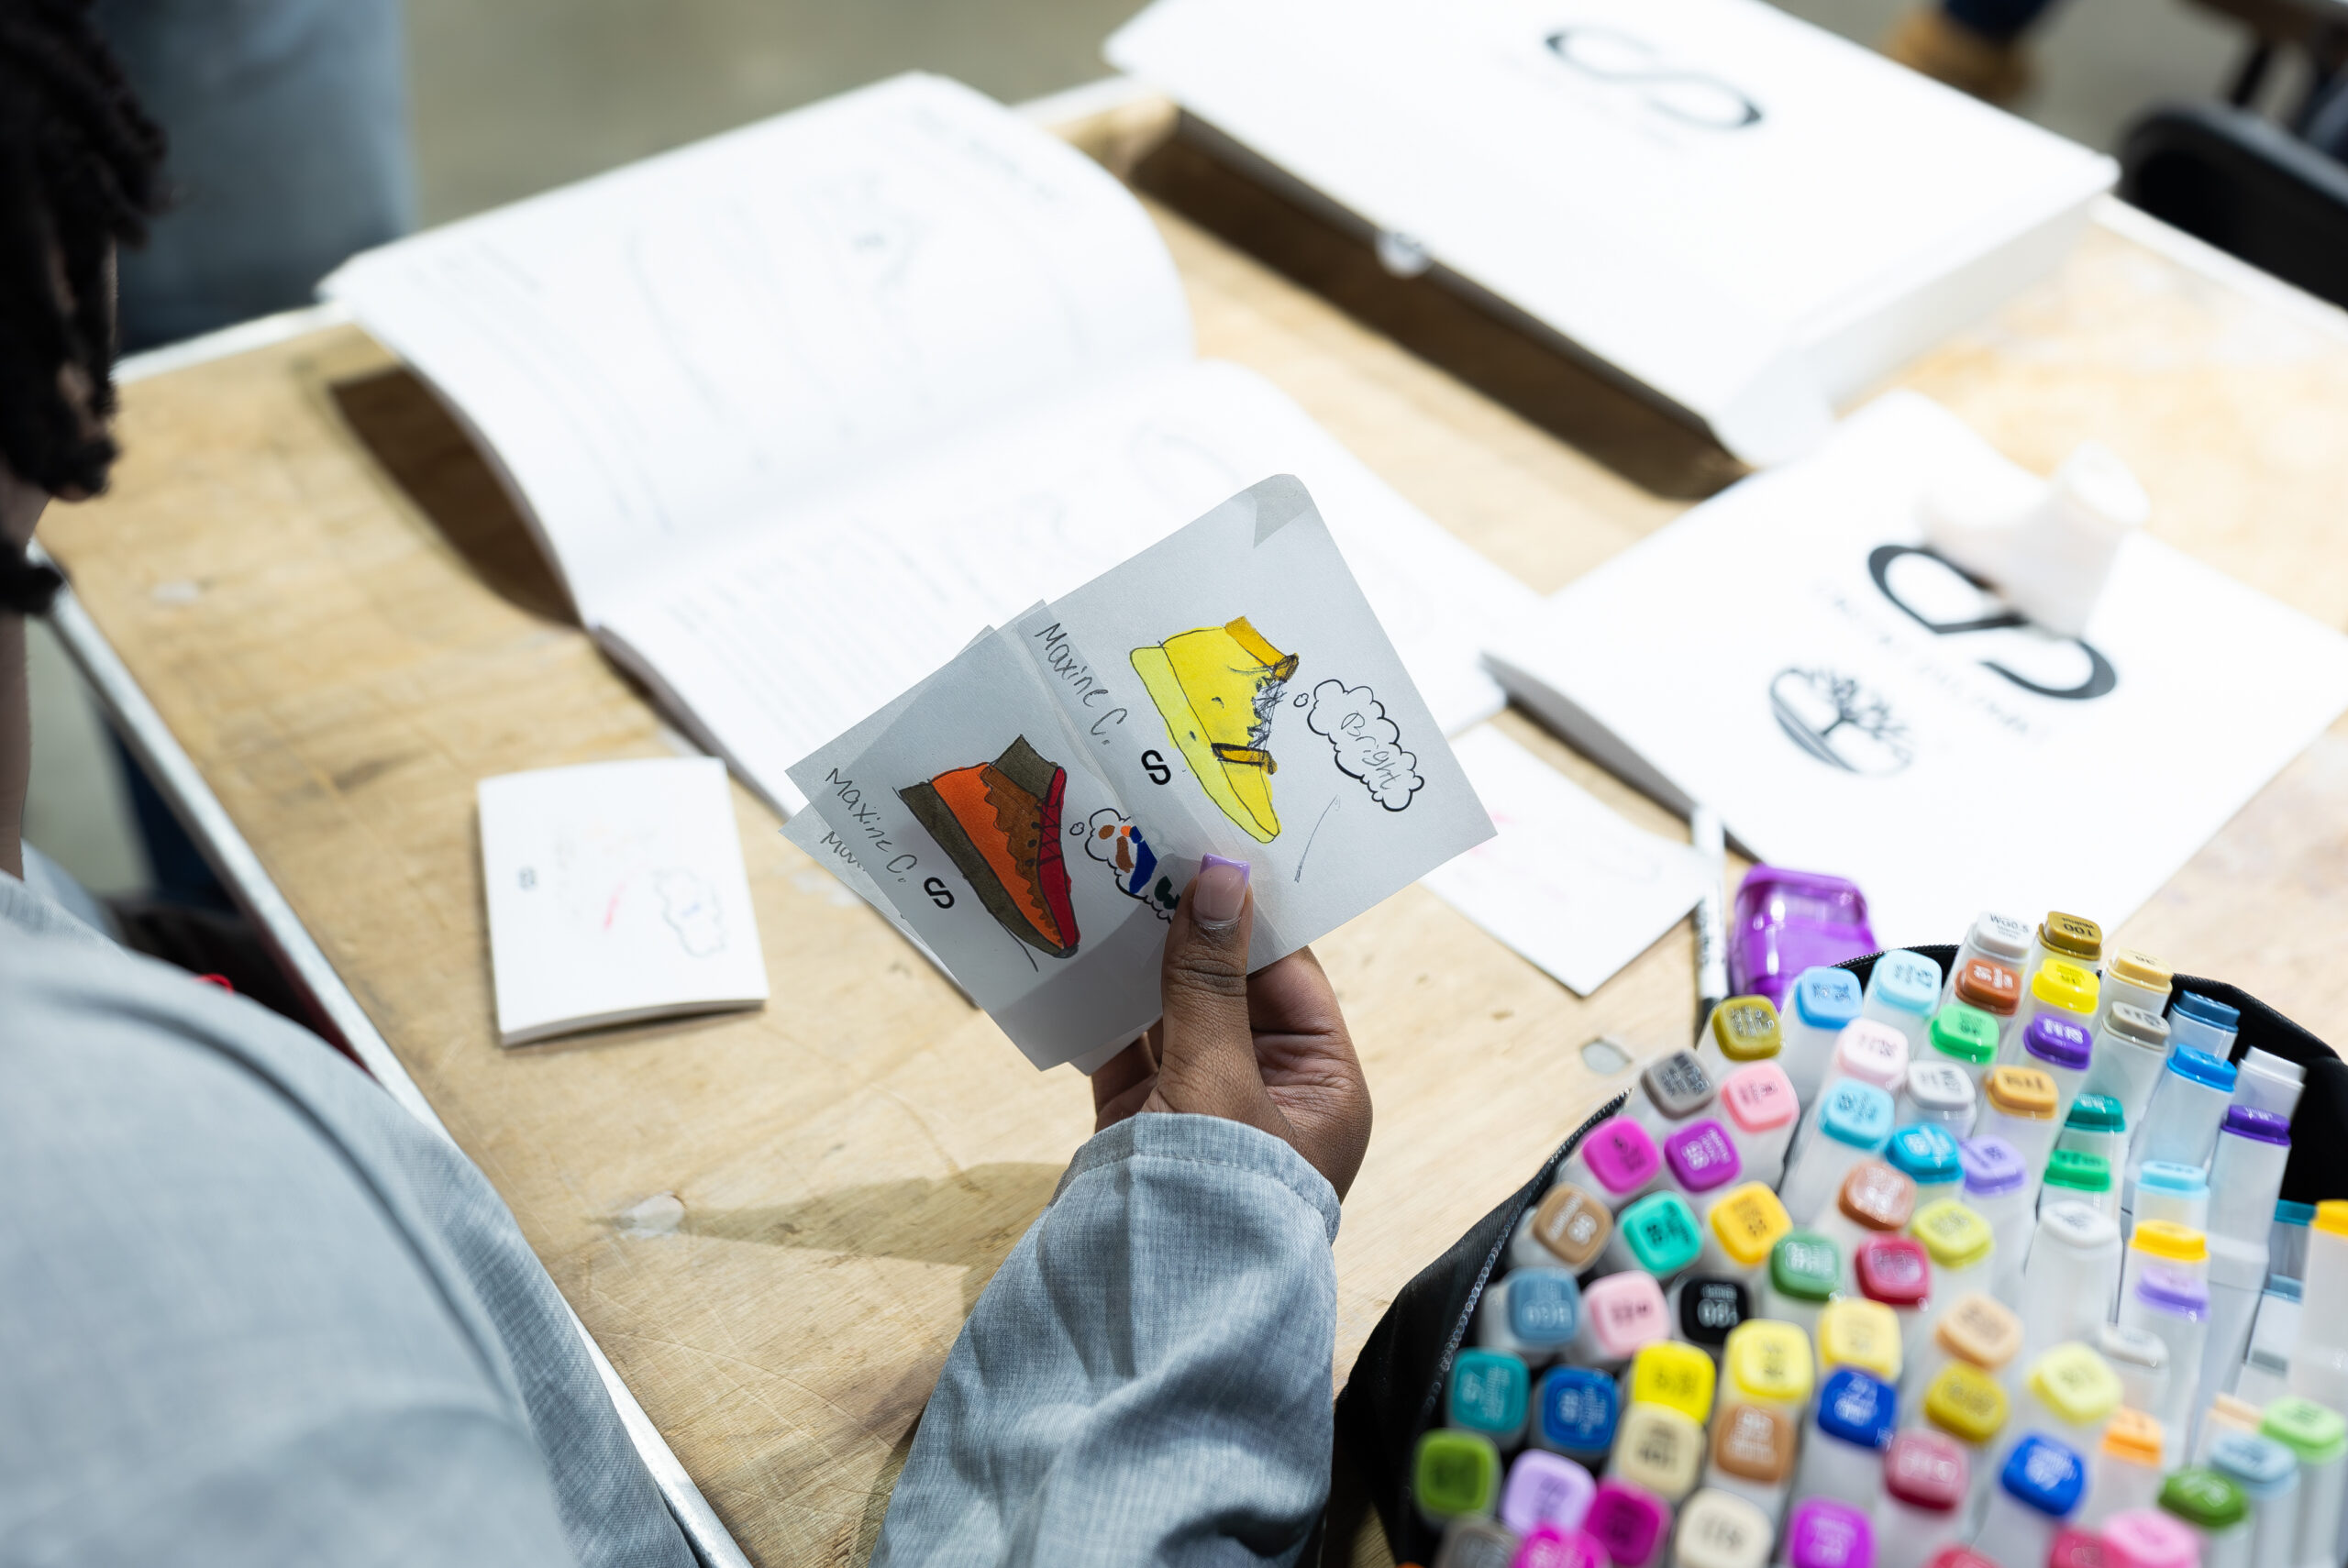 Following the success of their 2021 14-course after-school design course, Timberland and CNSTNT:DVLPMNT returned to New York City for a series of spin-off events.